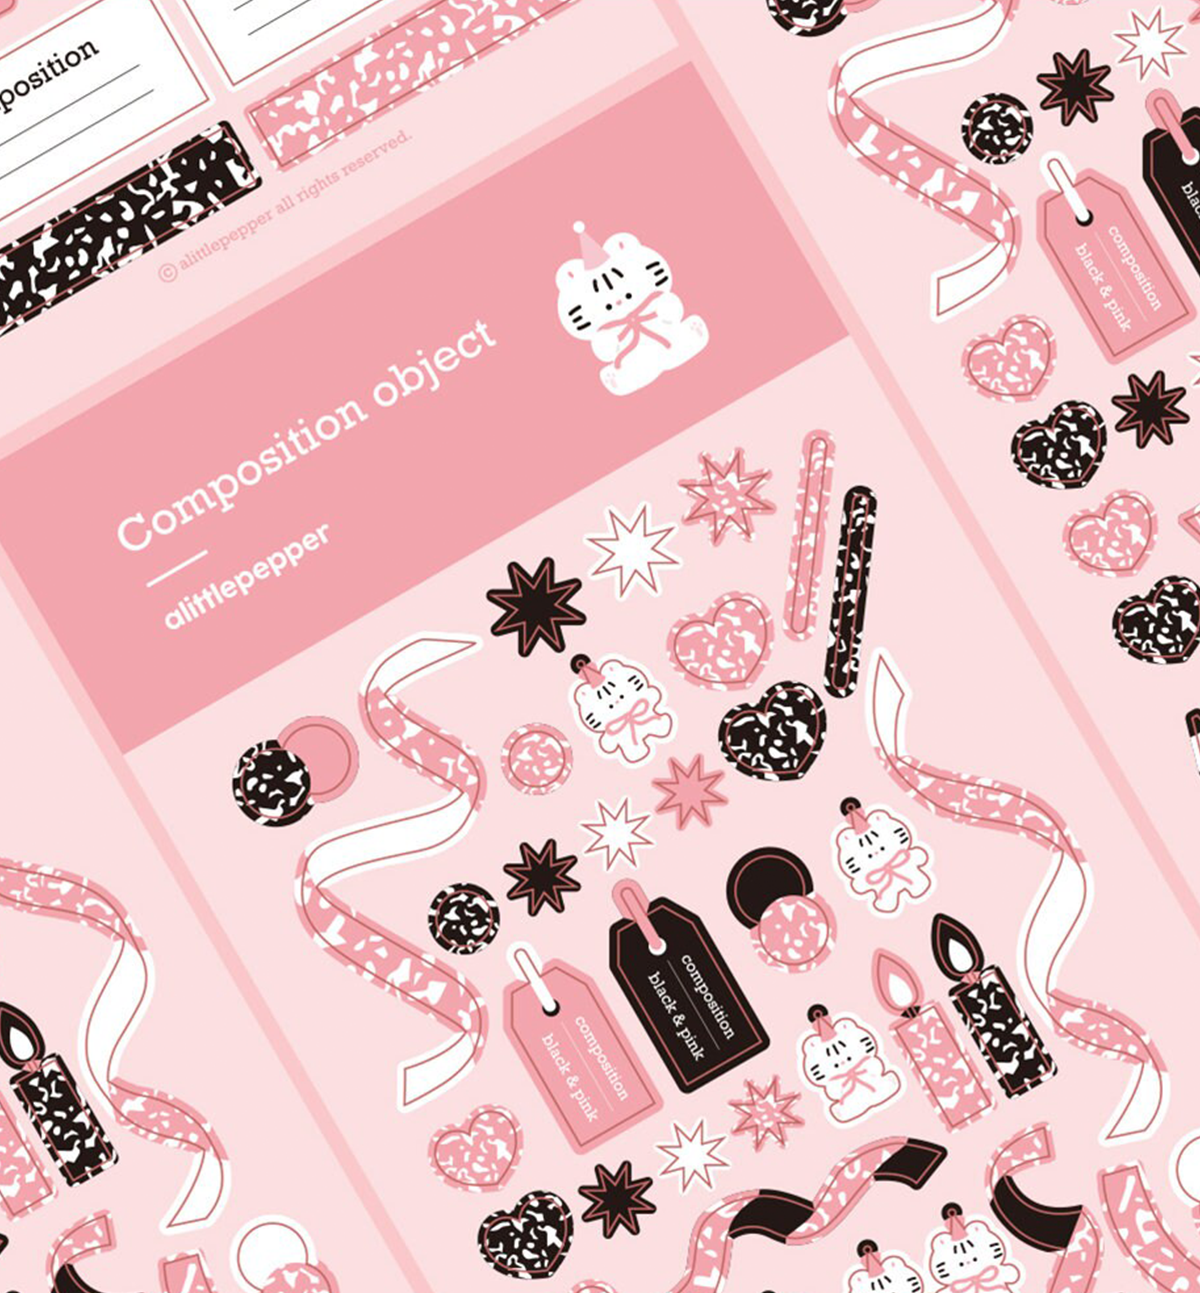 Composition Object Seal Sticker [Pink]